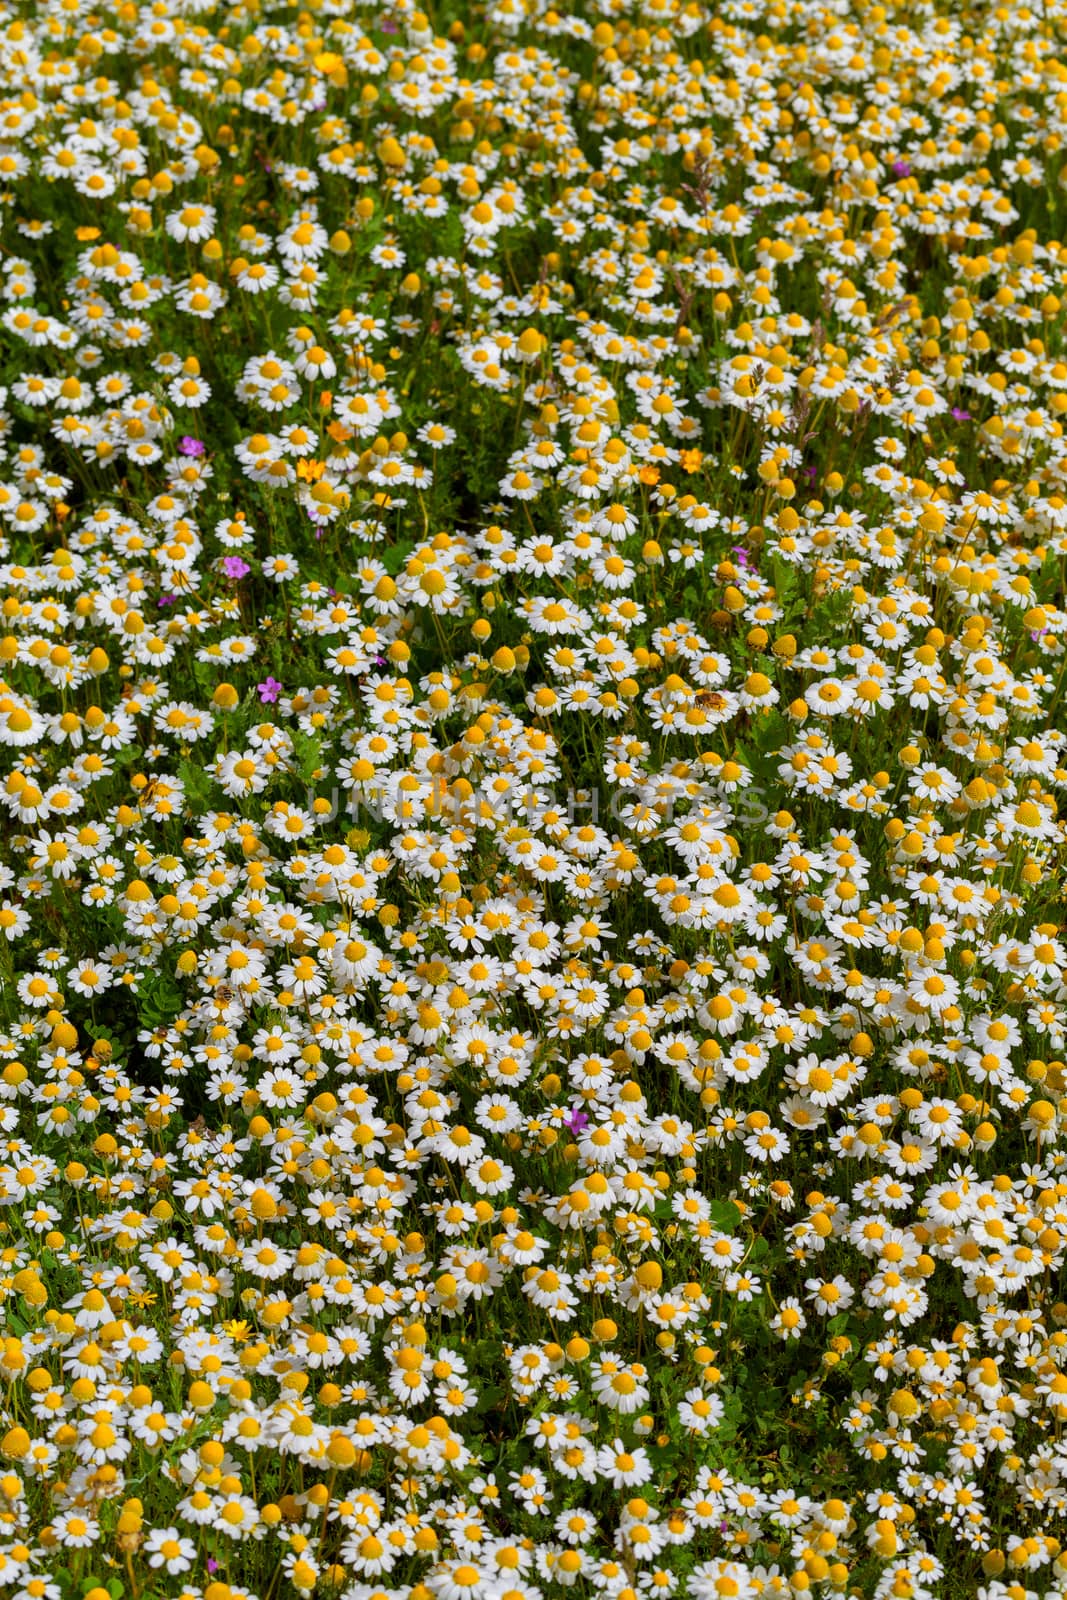 Flowering meadow all covered with daisy flowers